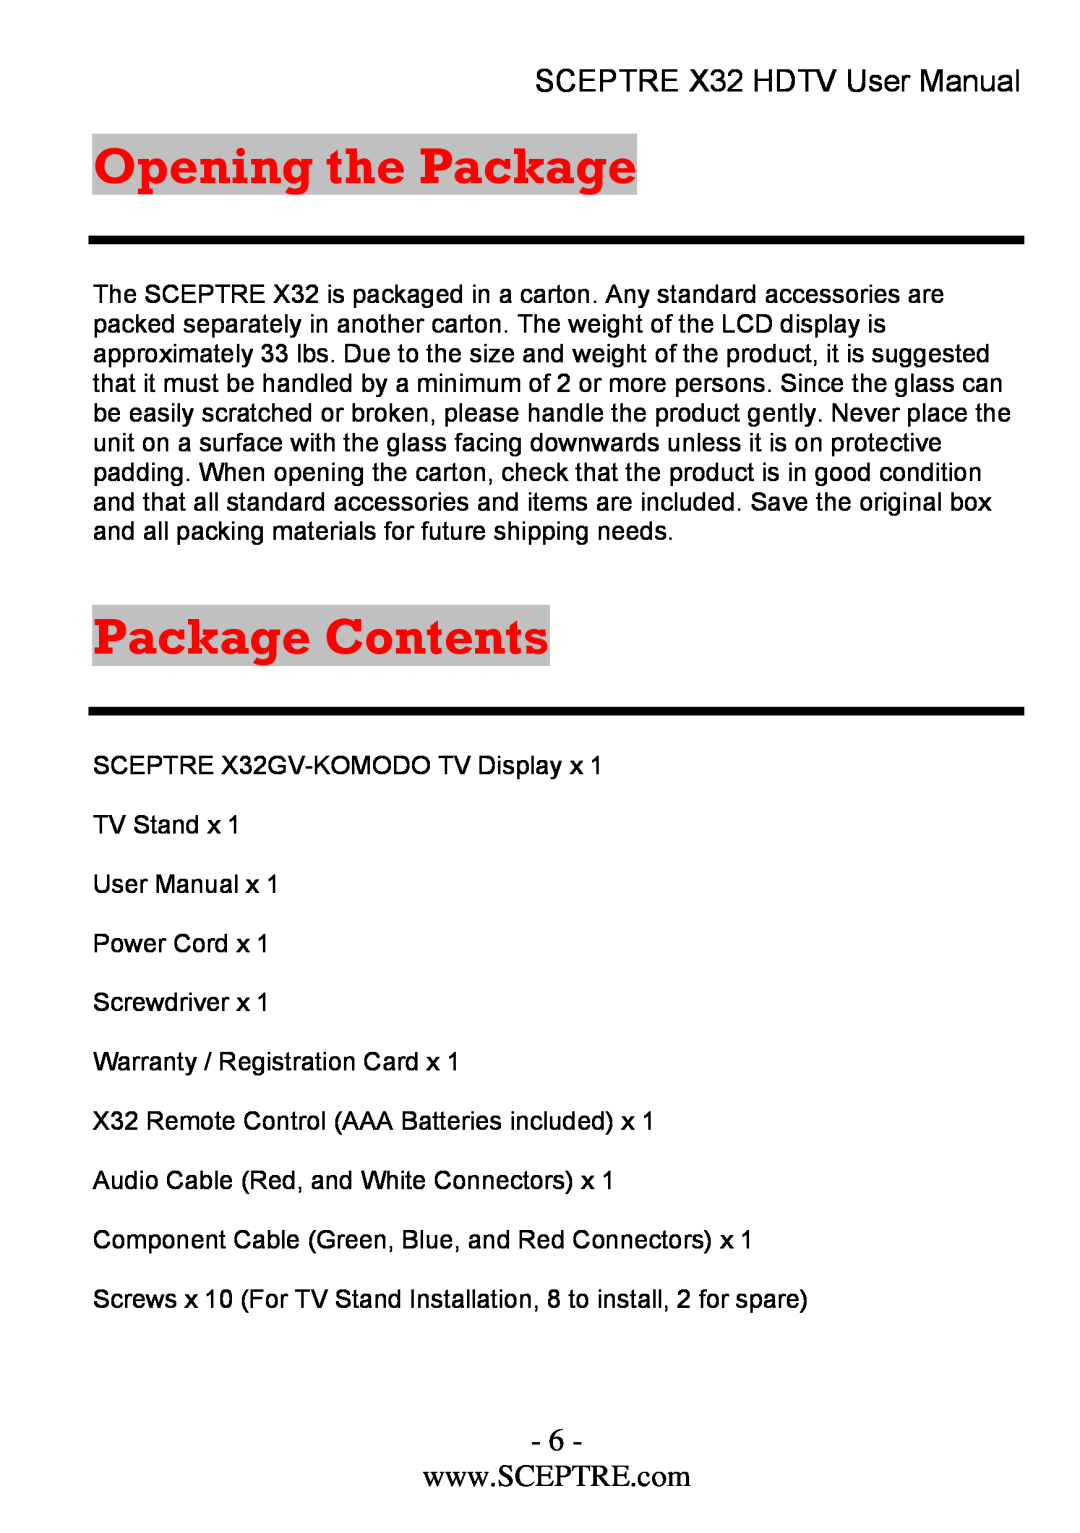 Sceptre Technologies x32 user manual Opening the Package, Package Contents, SCEPTRE X32 HDTV User Manual 